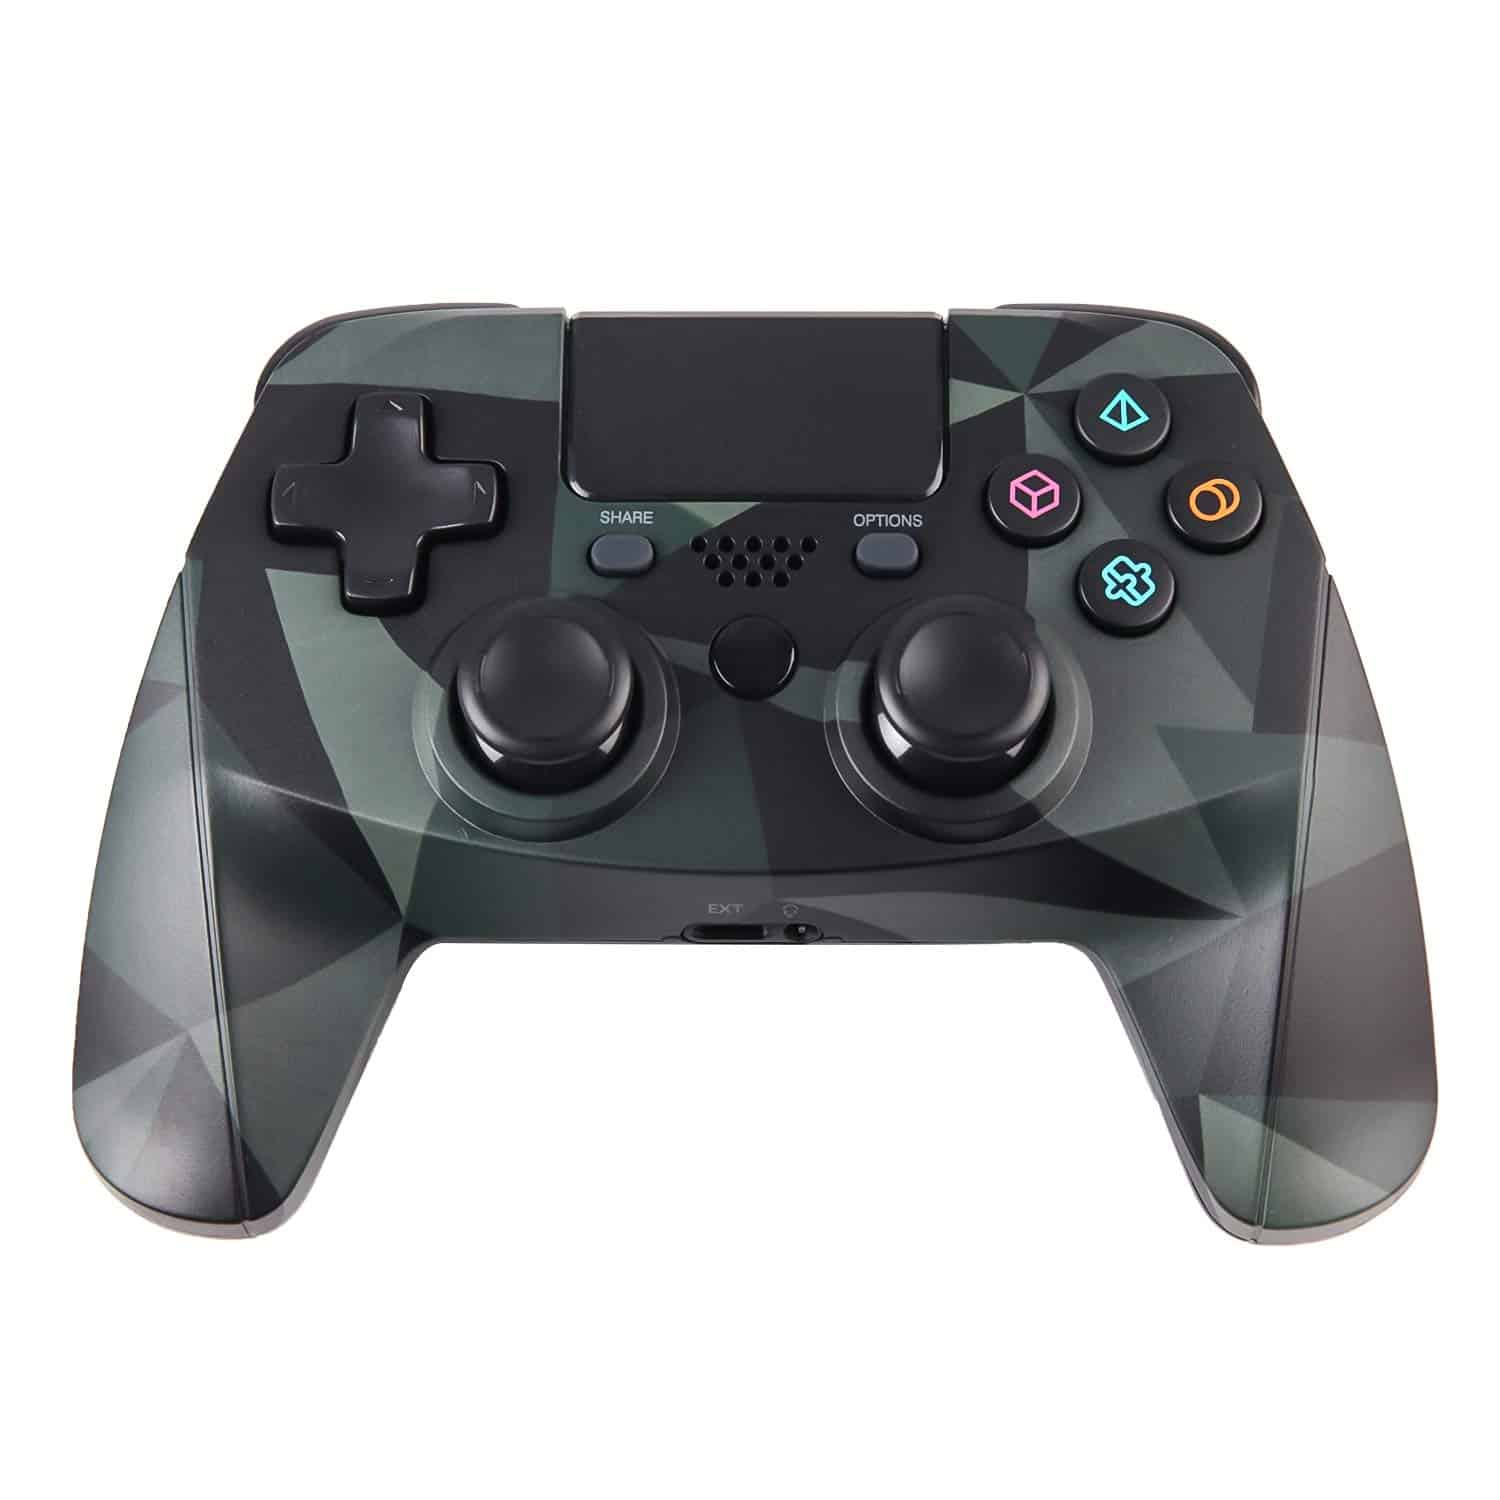 ZFY Z02 Wireless Gaming PS4 Controller for Playstation 4, Joystick with ...